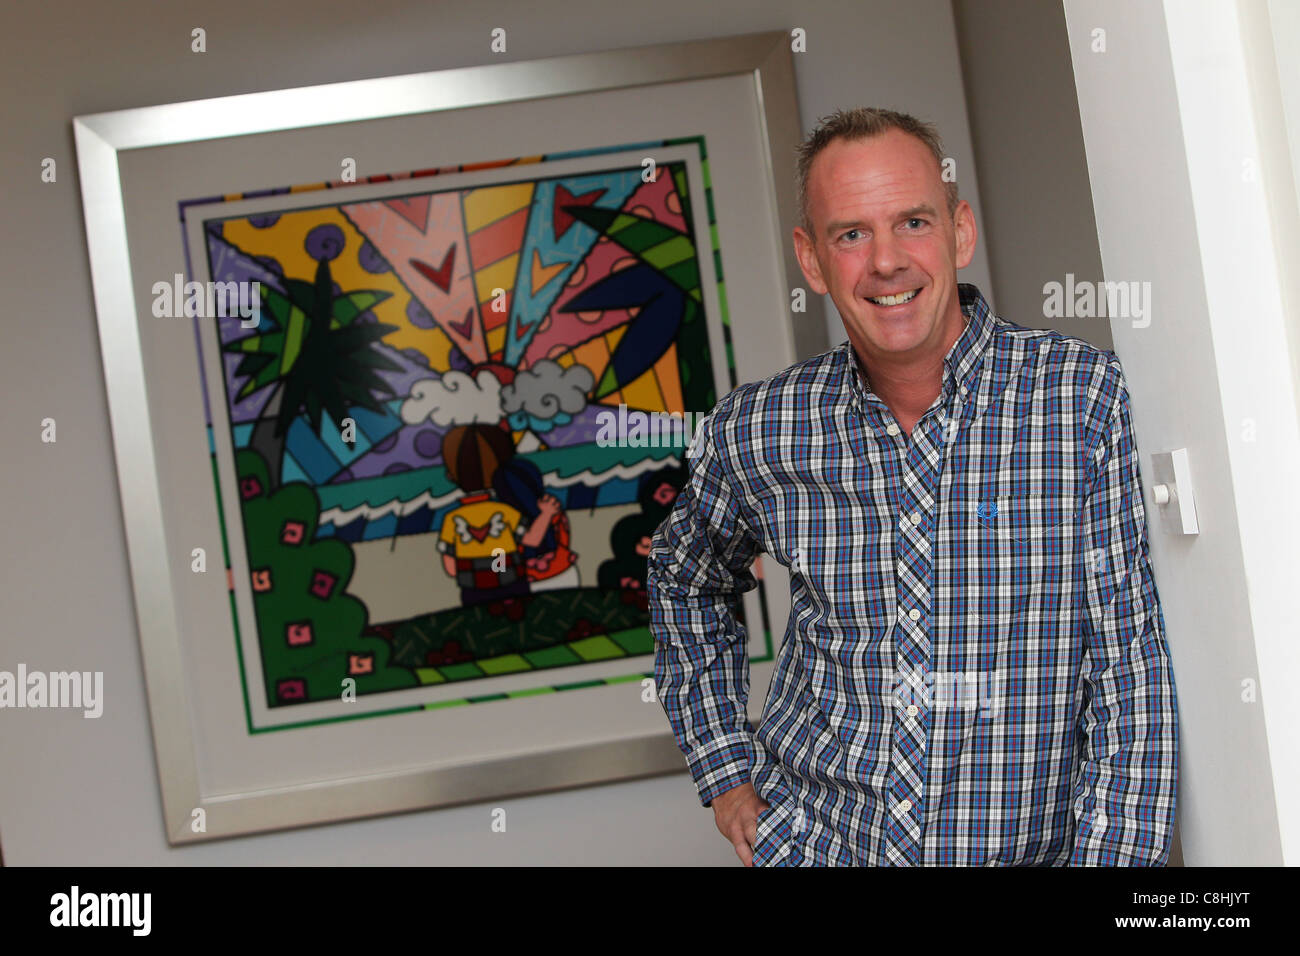 Fatboy Slim aka Norman Cook pictured at his home in Hove, East Sussex, UK. Stock Photo